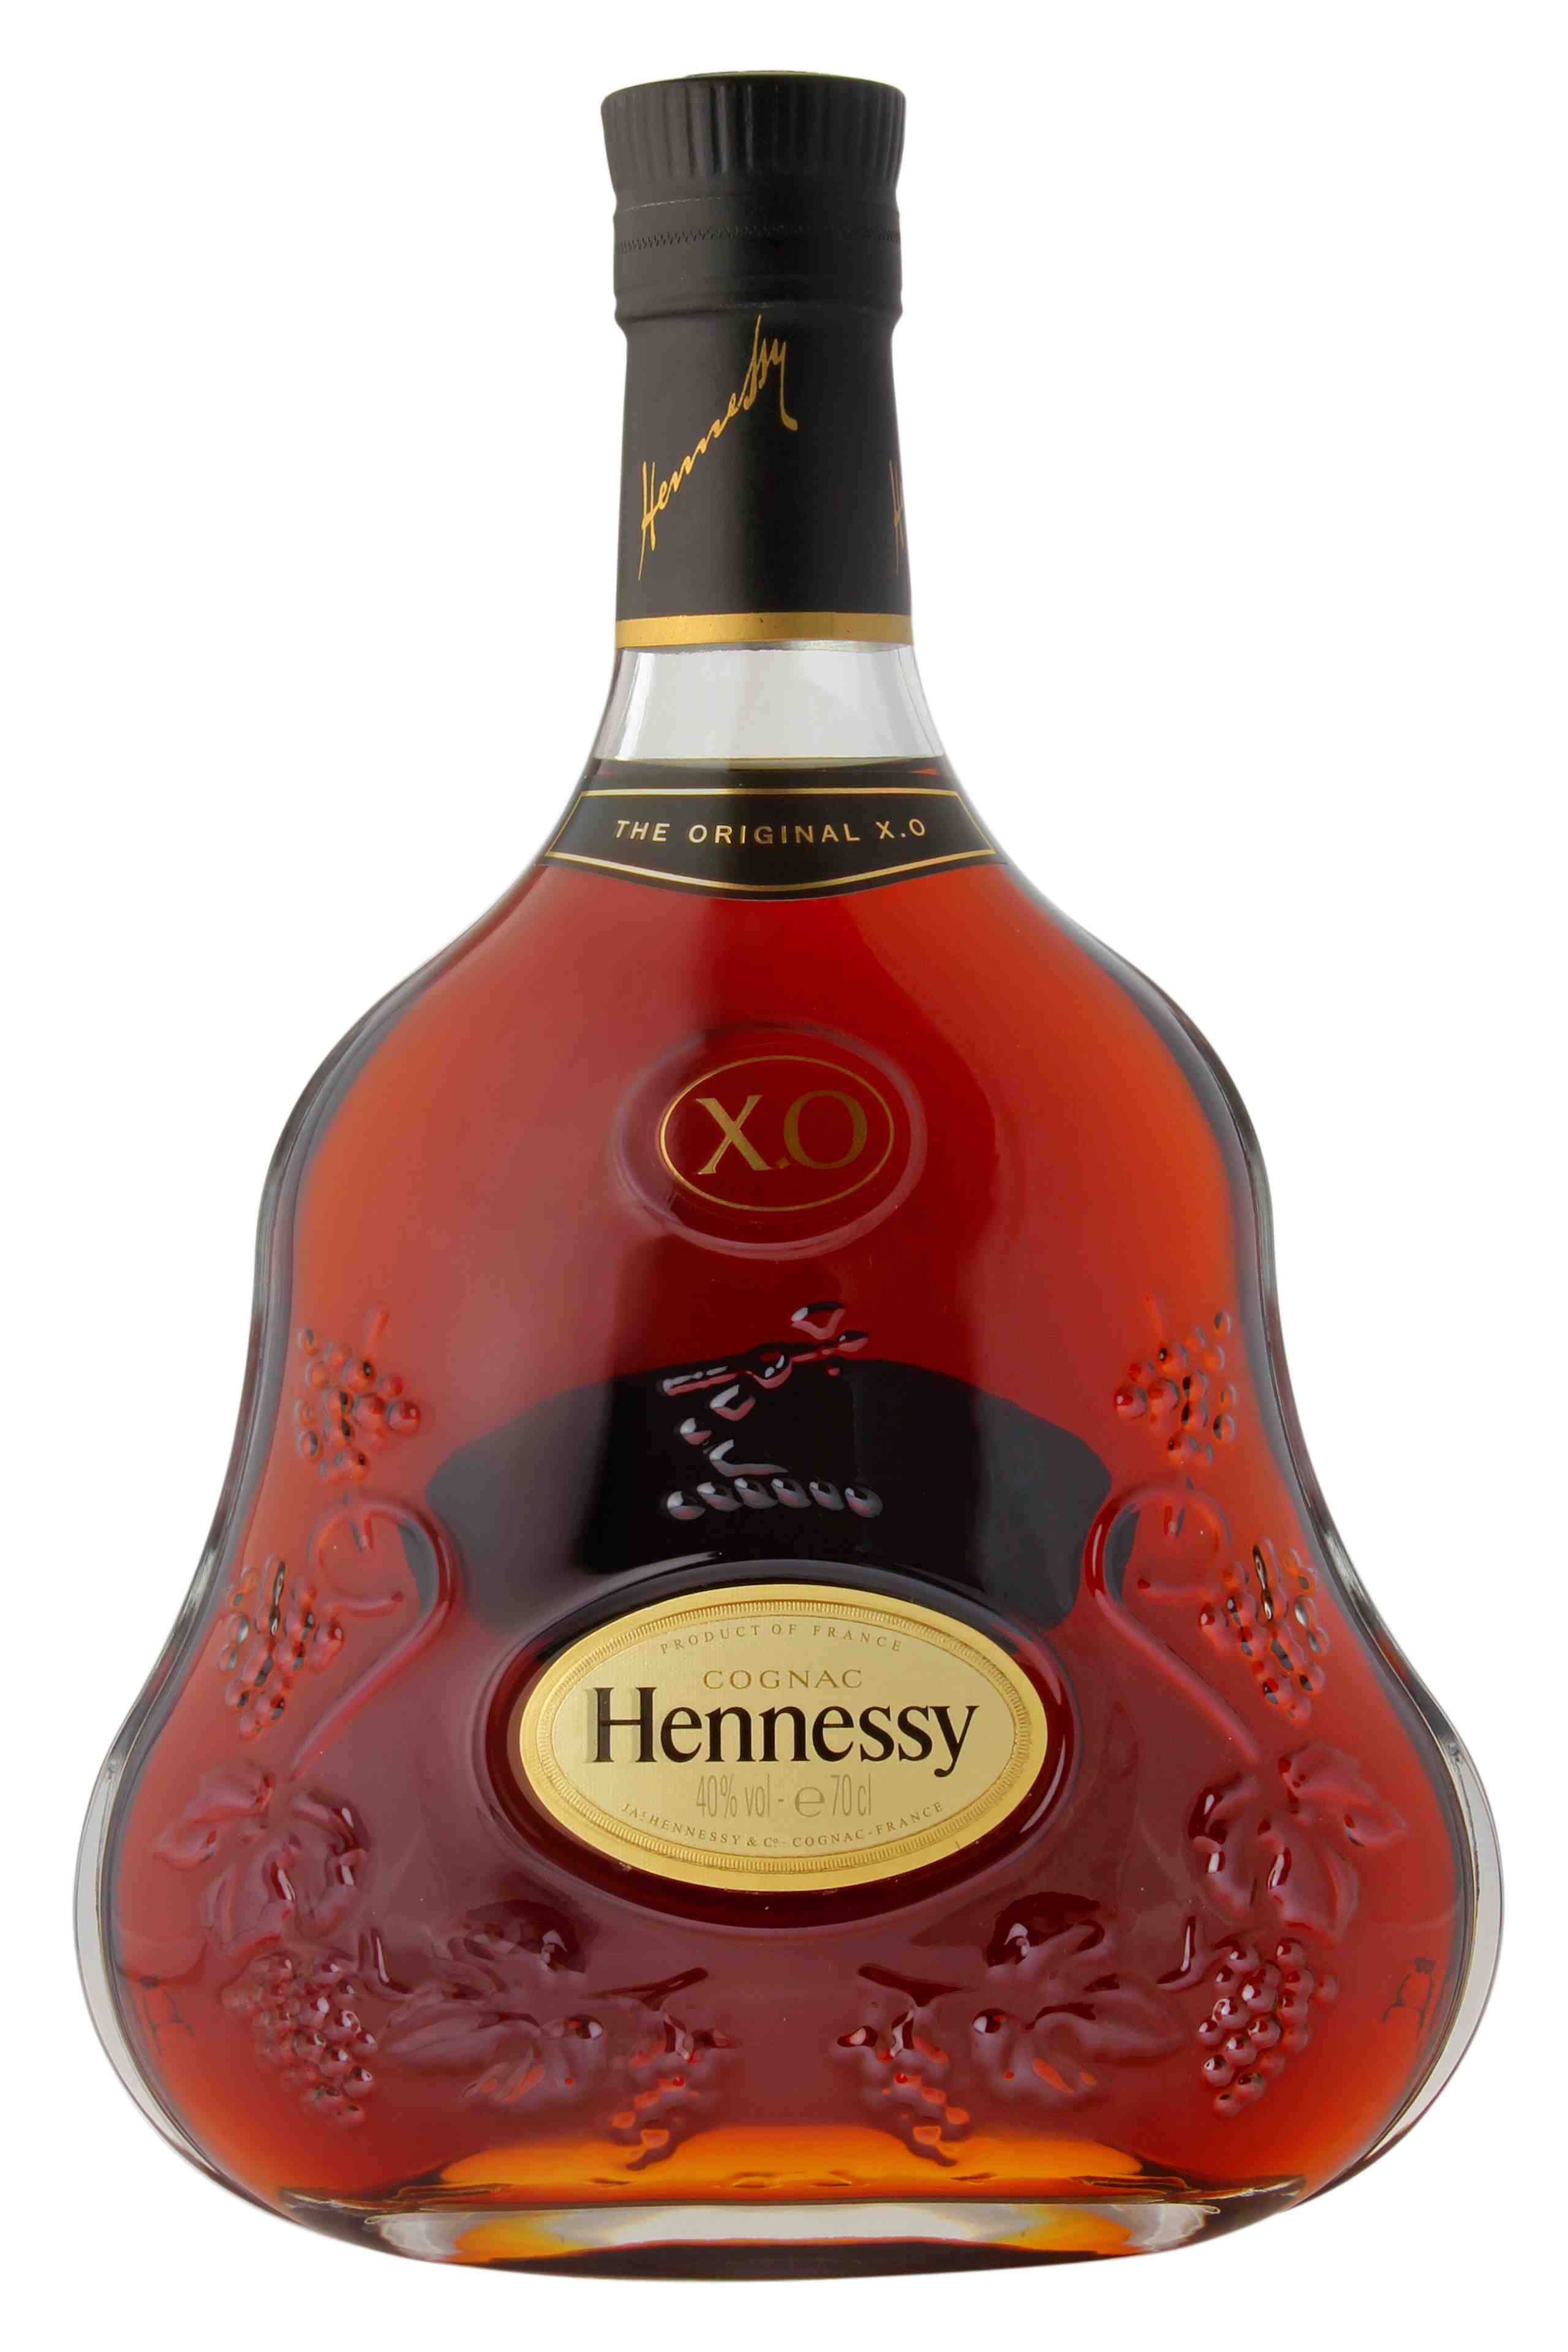 Hennessy Xo Price And Cognac Review Of This Extra Old Brandy Cognac